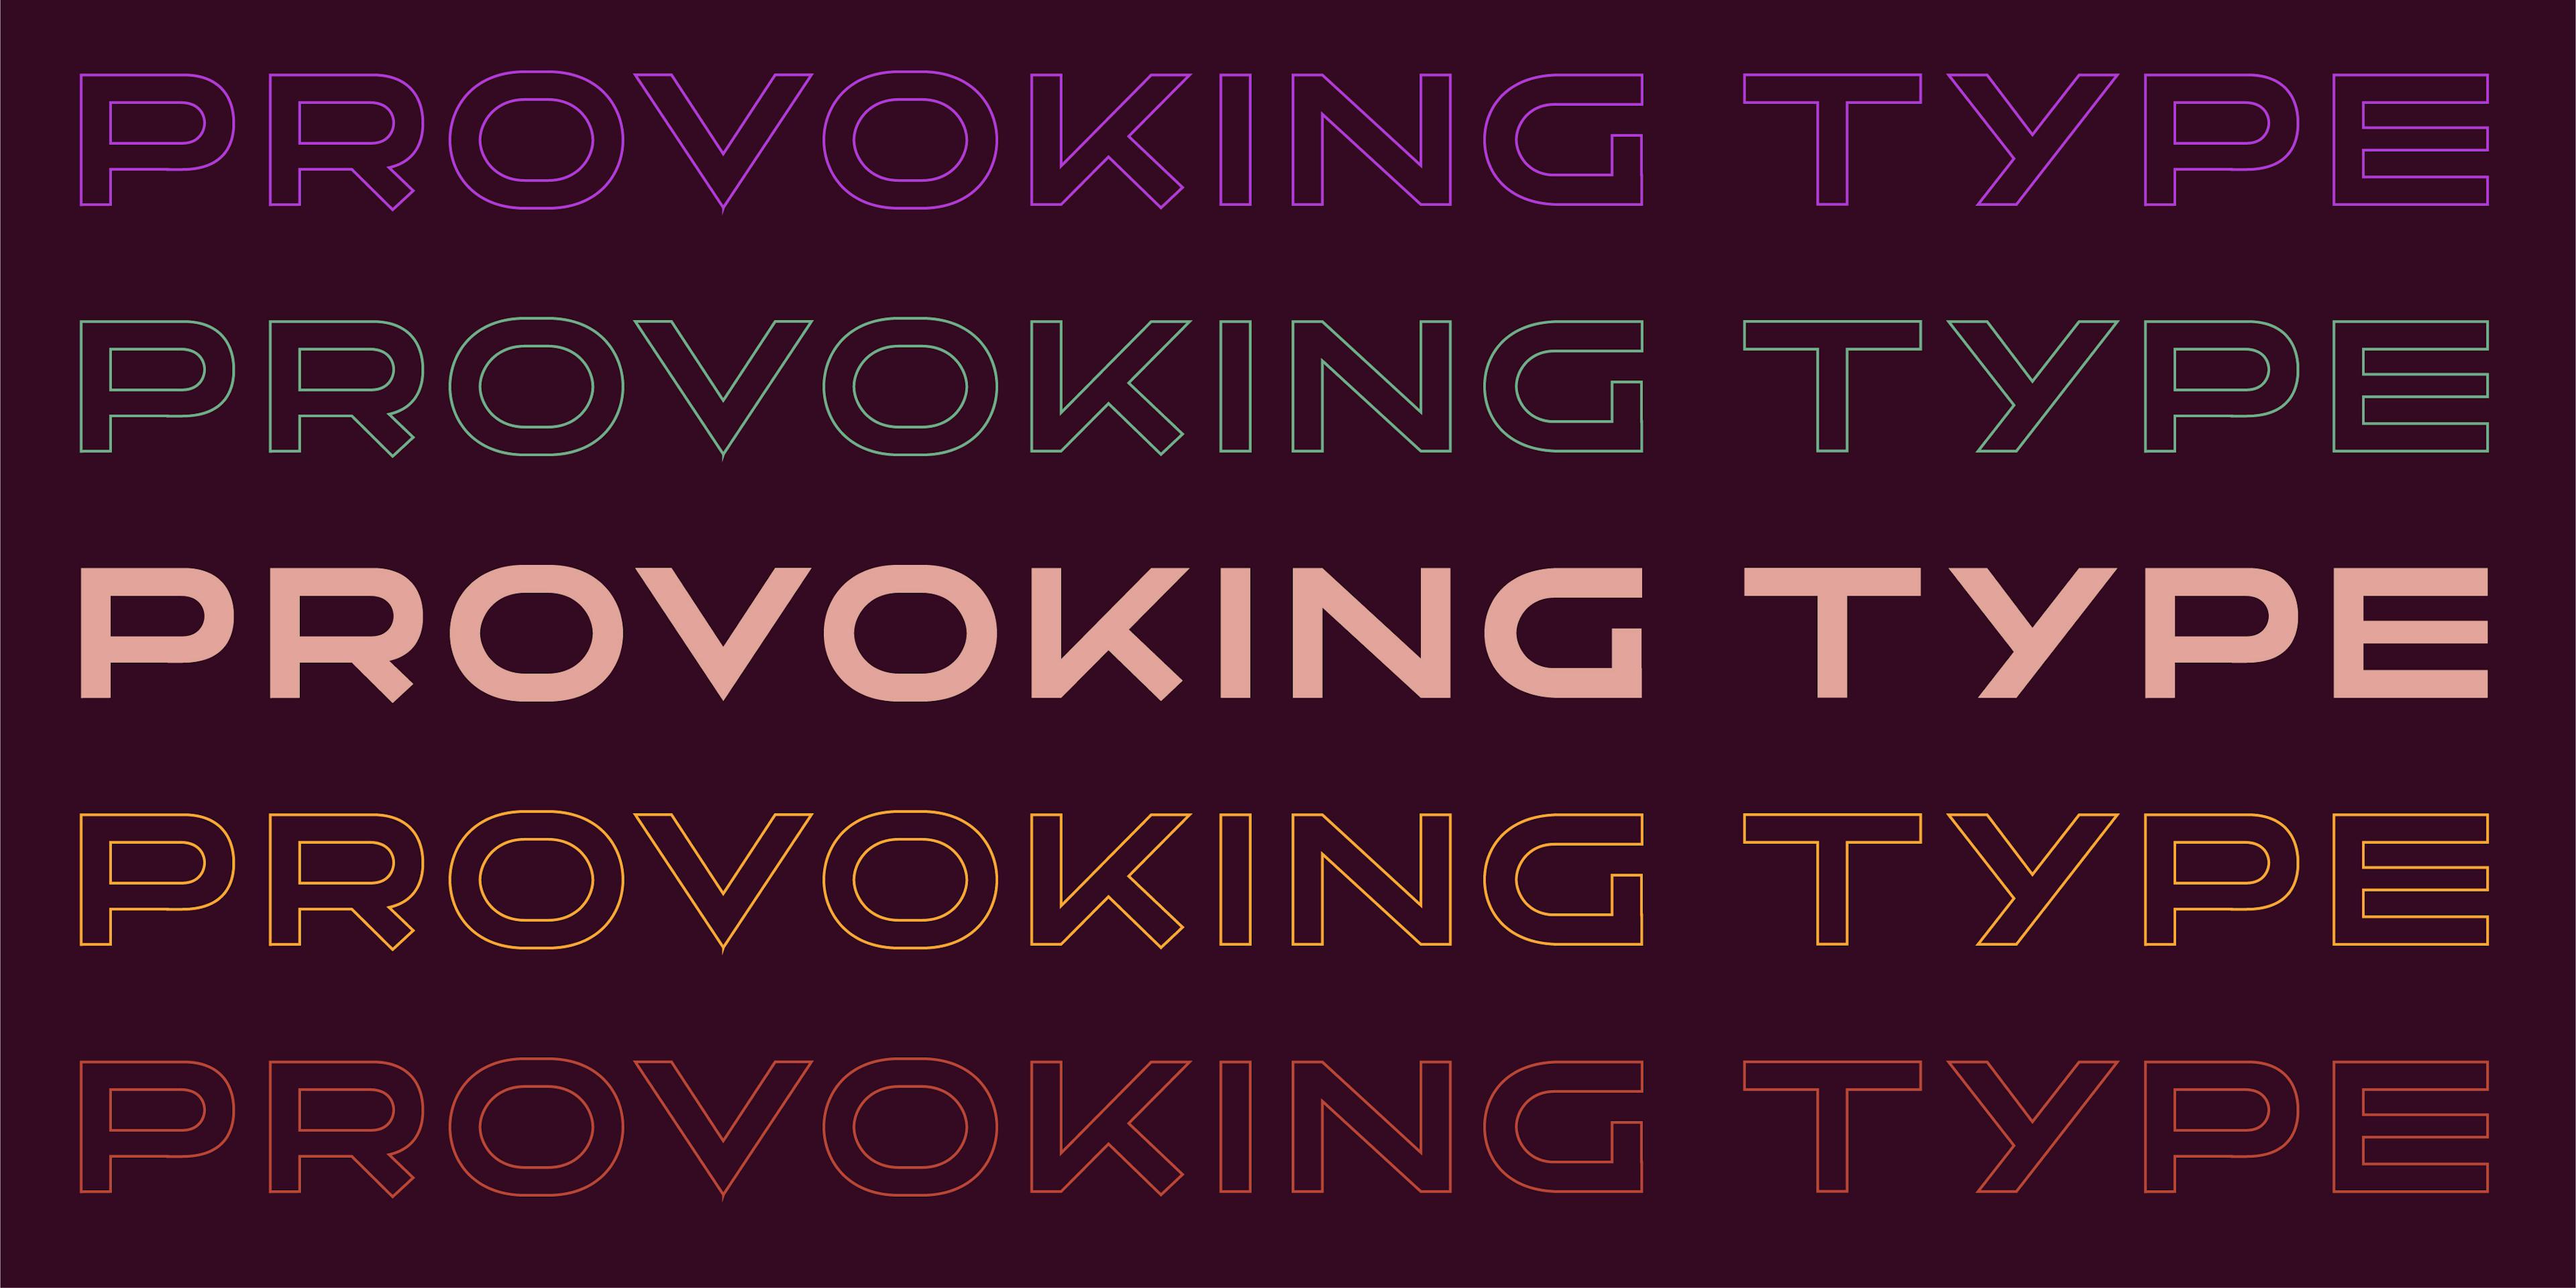 The words "Provoking Type" repeated 5 times with differing colors on dark magenta background